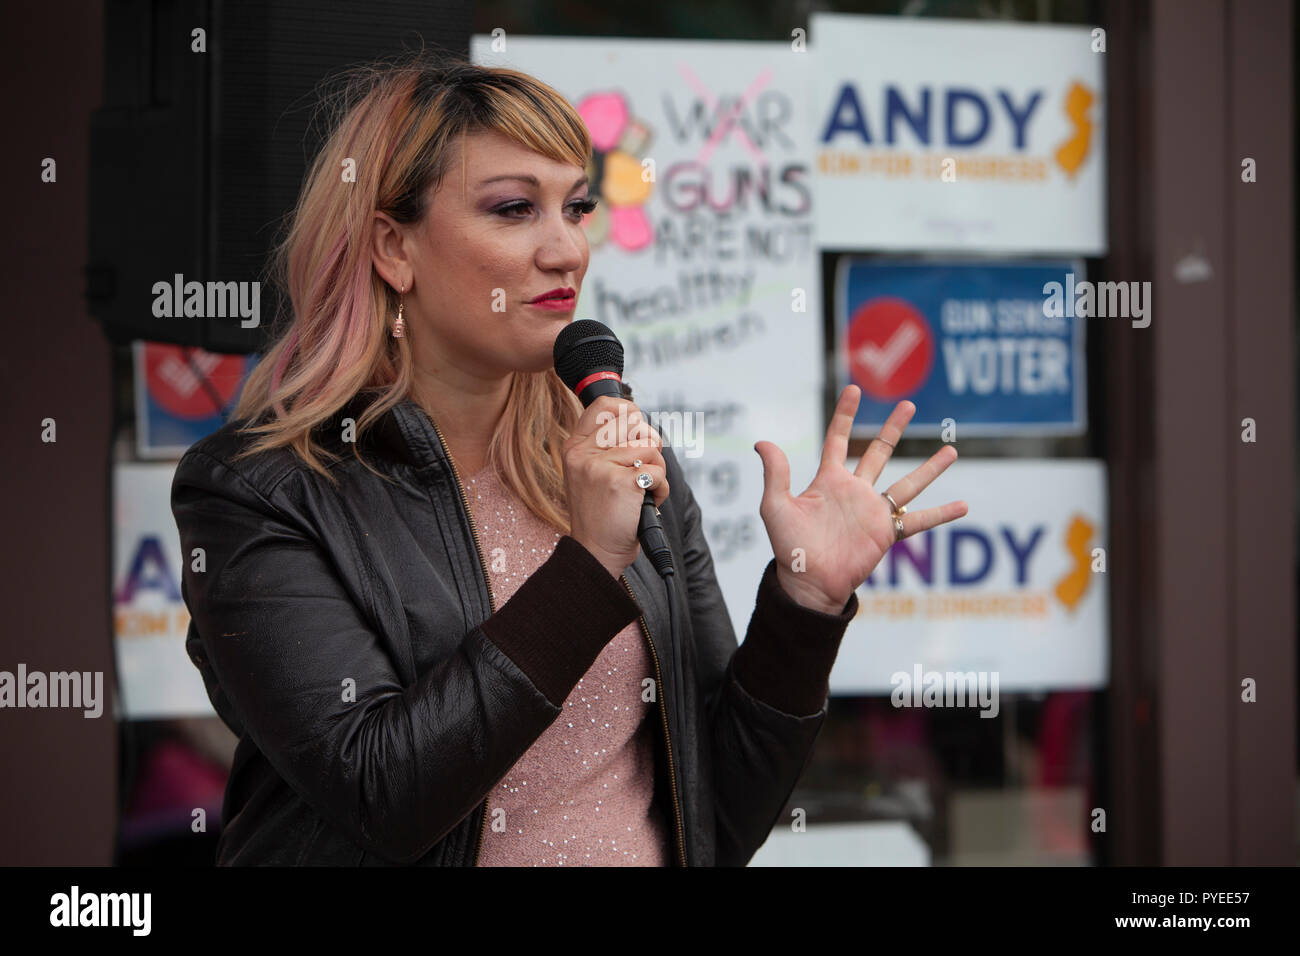 Oct 20, 2018. In a key battleground district in New Jersey, Democratic Challenger Andy Kim holds a ”Women’s Rally” to empower and encourage women to vote in the 2018 Midterms. Nicole Brenner-Schmitz, Director of NARAL endorses the candidate and speaks about womans rights. Andy Kim, a former national security official during the Obama administration and Republican Rep. Tom MacArthur are locked in a “statistical tie” in the 3rd Congessional District in South Jersey. A new Stockton University poll shows MacArthur, a prime mover in the effort to repeal the Affordable Care Act under President Trump Stock Photo